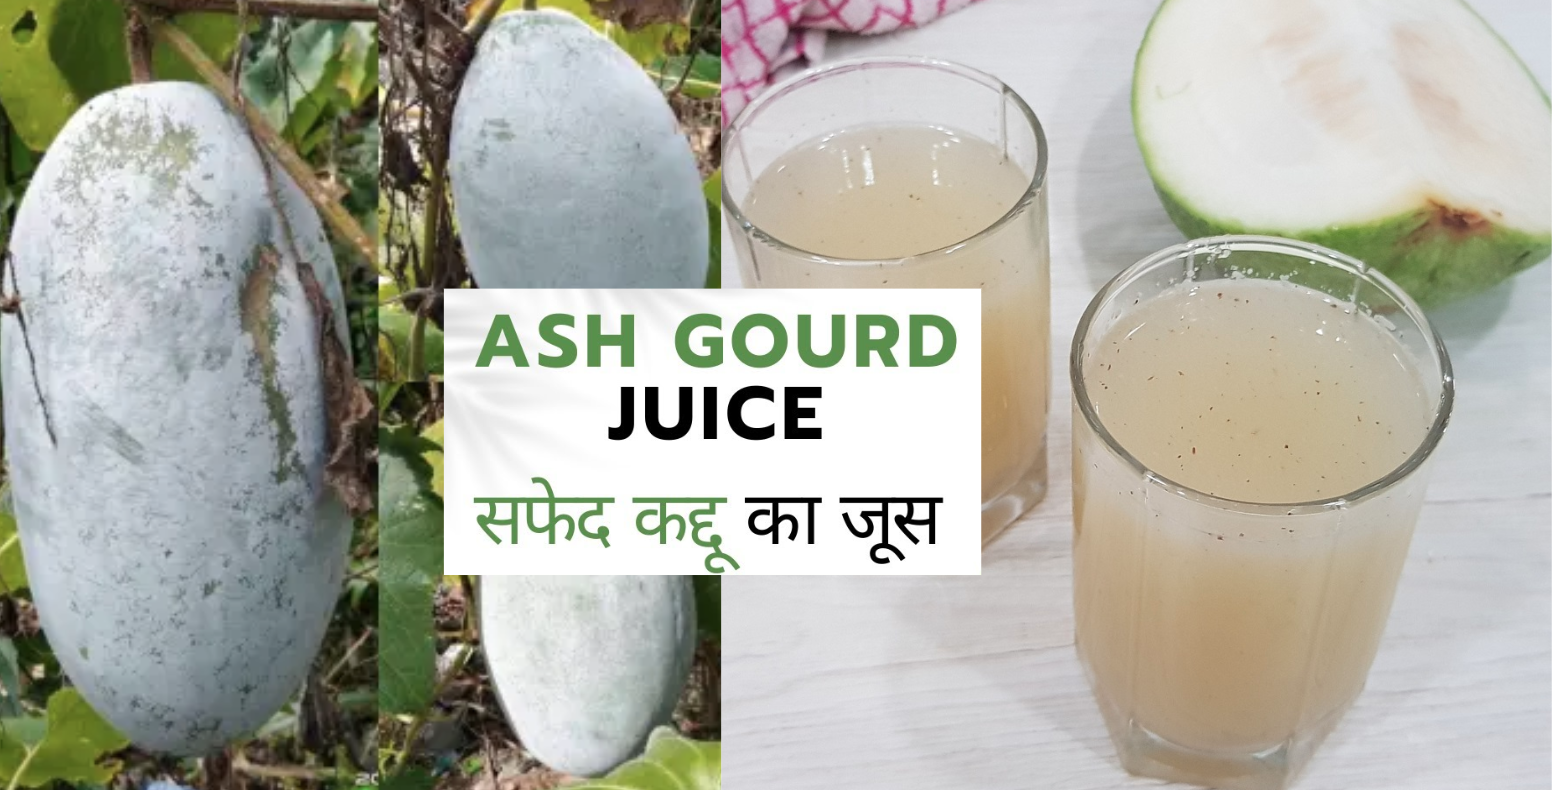 Ash Gourd Juice Benefits, Side Effects, and a Refreshing Recipe